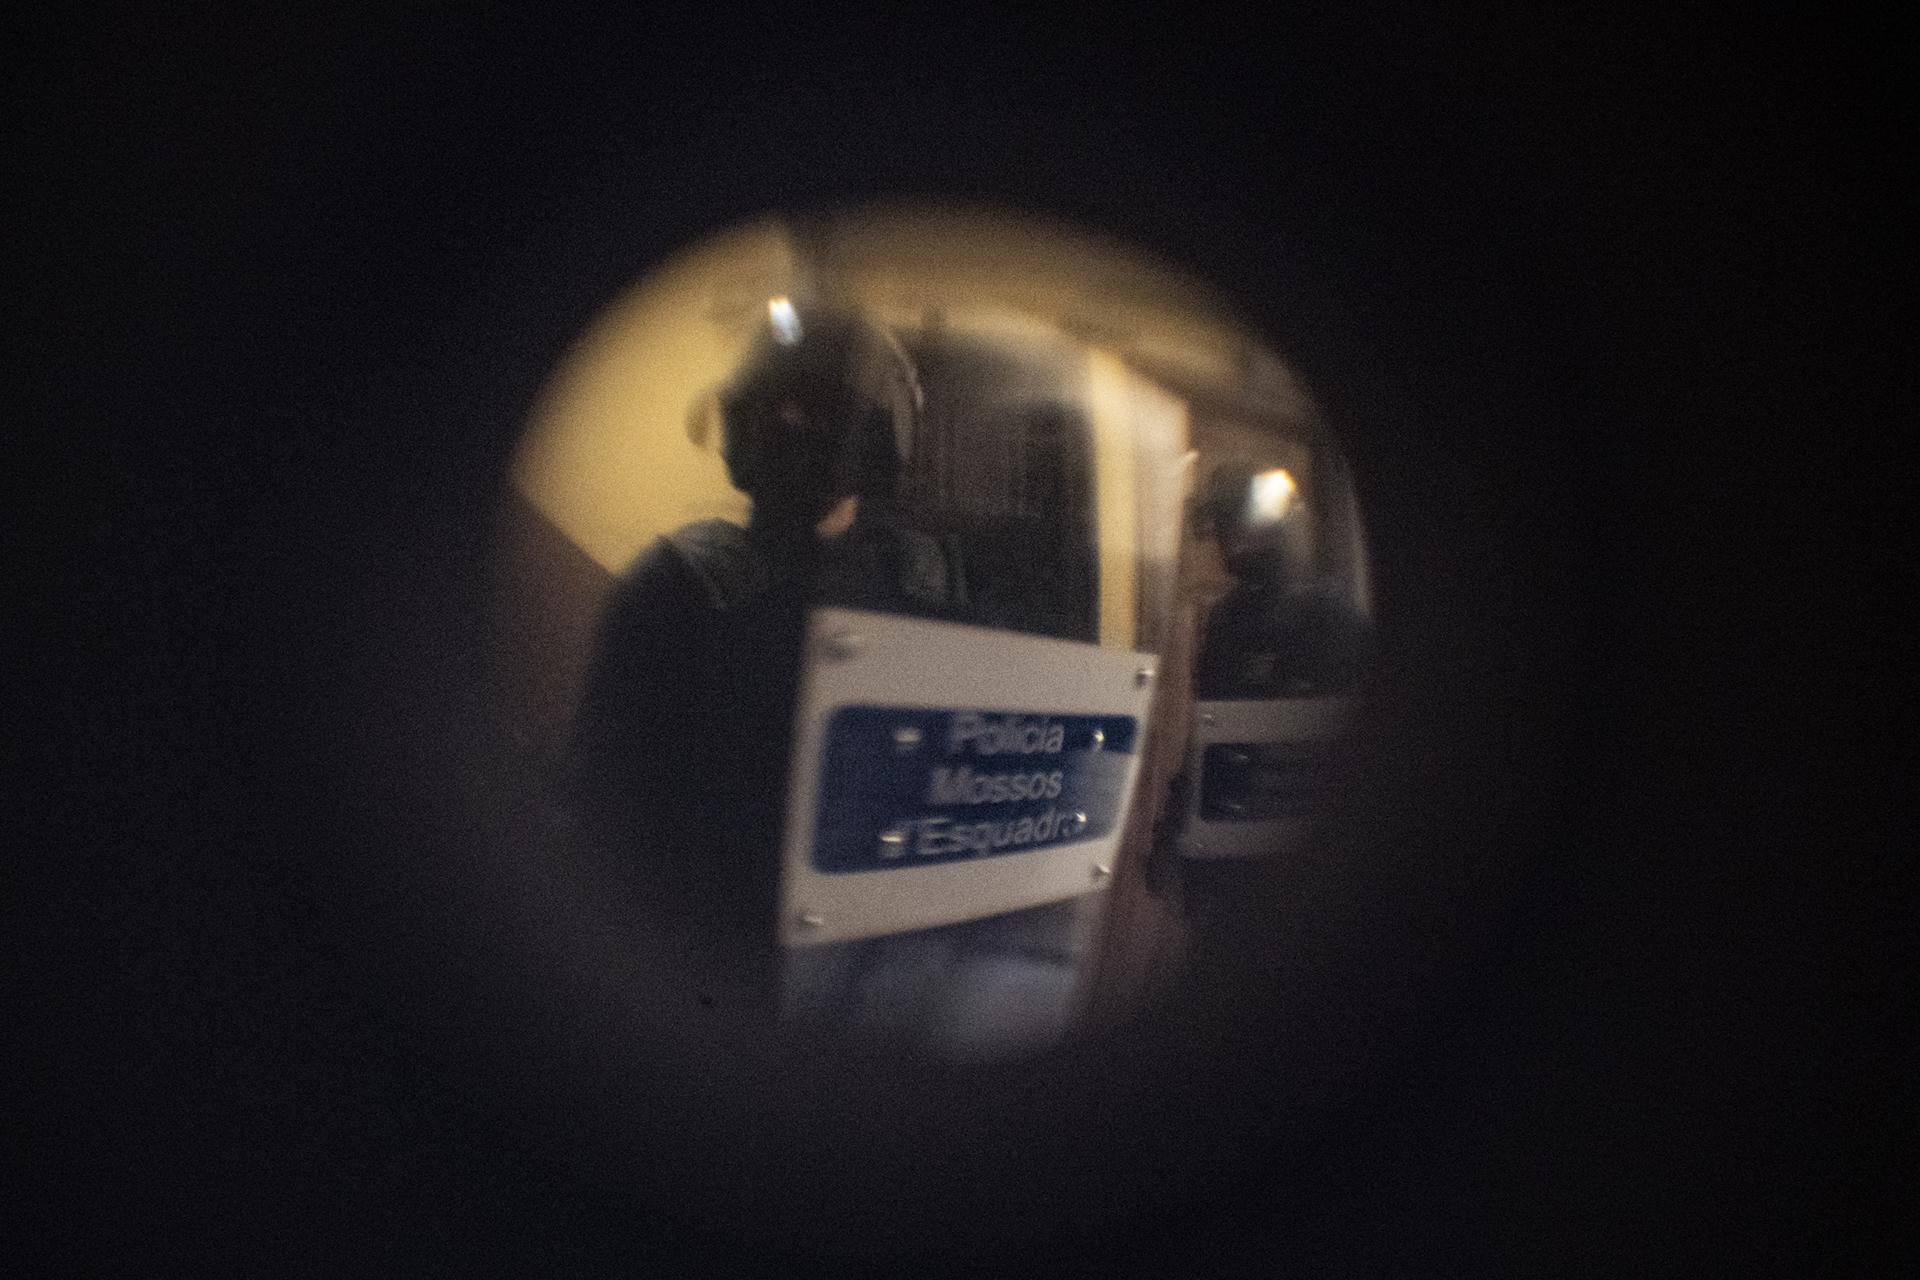  Police officers, seen through the door&rsquo;s spyhole, arrives to evict Alejando IbanÌƒez, 30, from his apartment in GuinardoÌ neighbourhood of Barcelona, on December 10, 2020. Alejandro has been accused of not making rent payments and not renewing his lease since February of 2020. Has vulnerable status and works as a delivery rider.&nbsp; (AP Photo/Joan Mateu) &nbsp; &nbsp; &nbsp; &nbsp; &nbsp; &nbsp; &nbsp; &nbsp; &nbsp; &nbsp; &nbsp; &nbsp; &nbsp; &nbsp; &nbsp; &nbsp; &nbsp; &nbsp; 